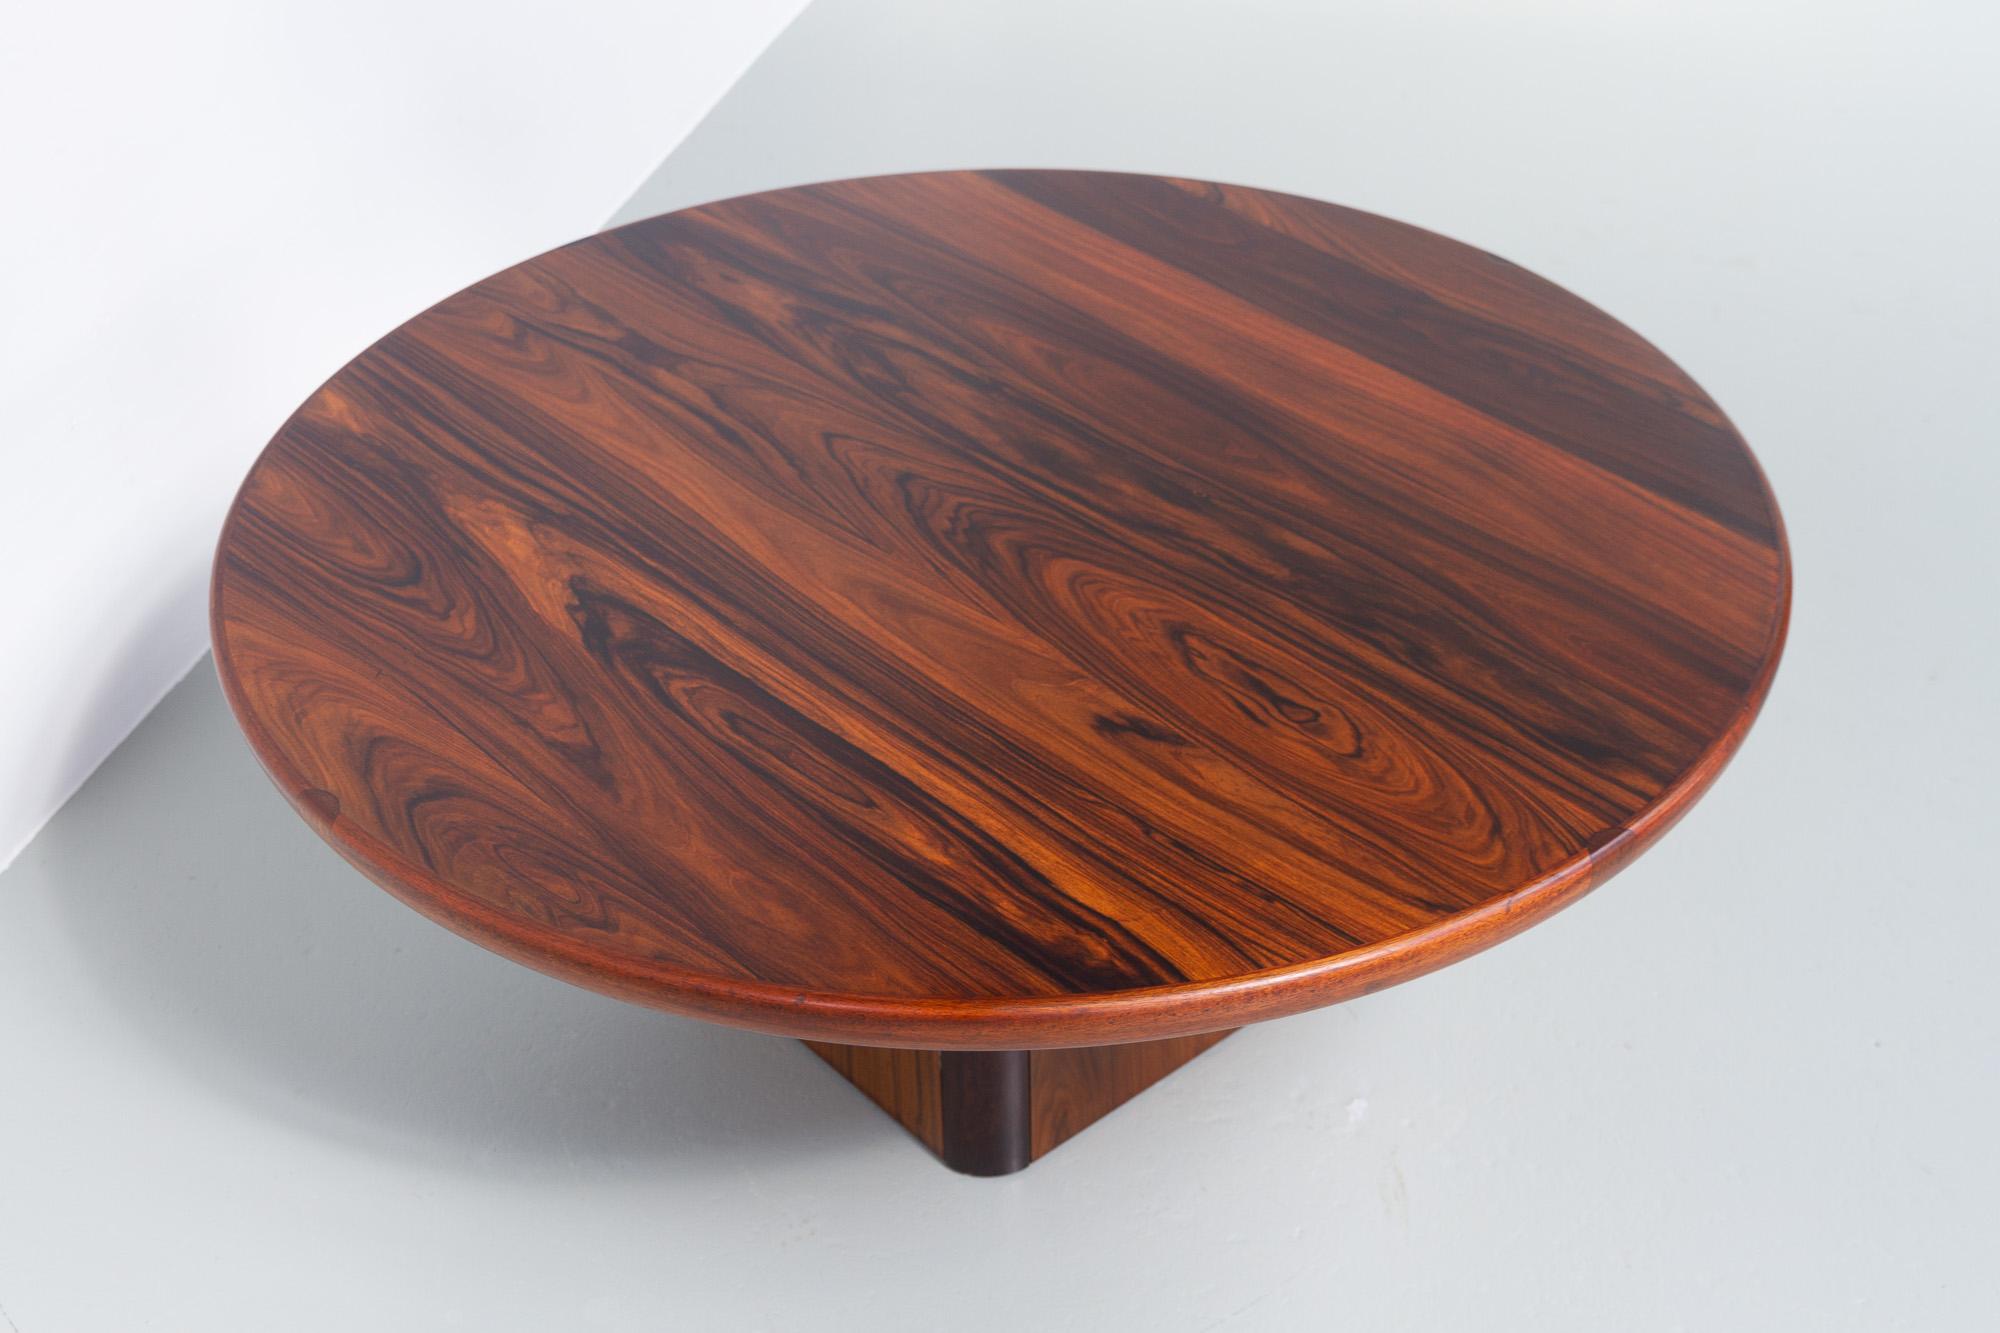 Mid-20th Century Danish Modern Rosewood Coffee Table by Jensen Frøkjær, 1960s For Sale